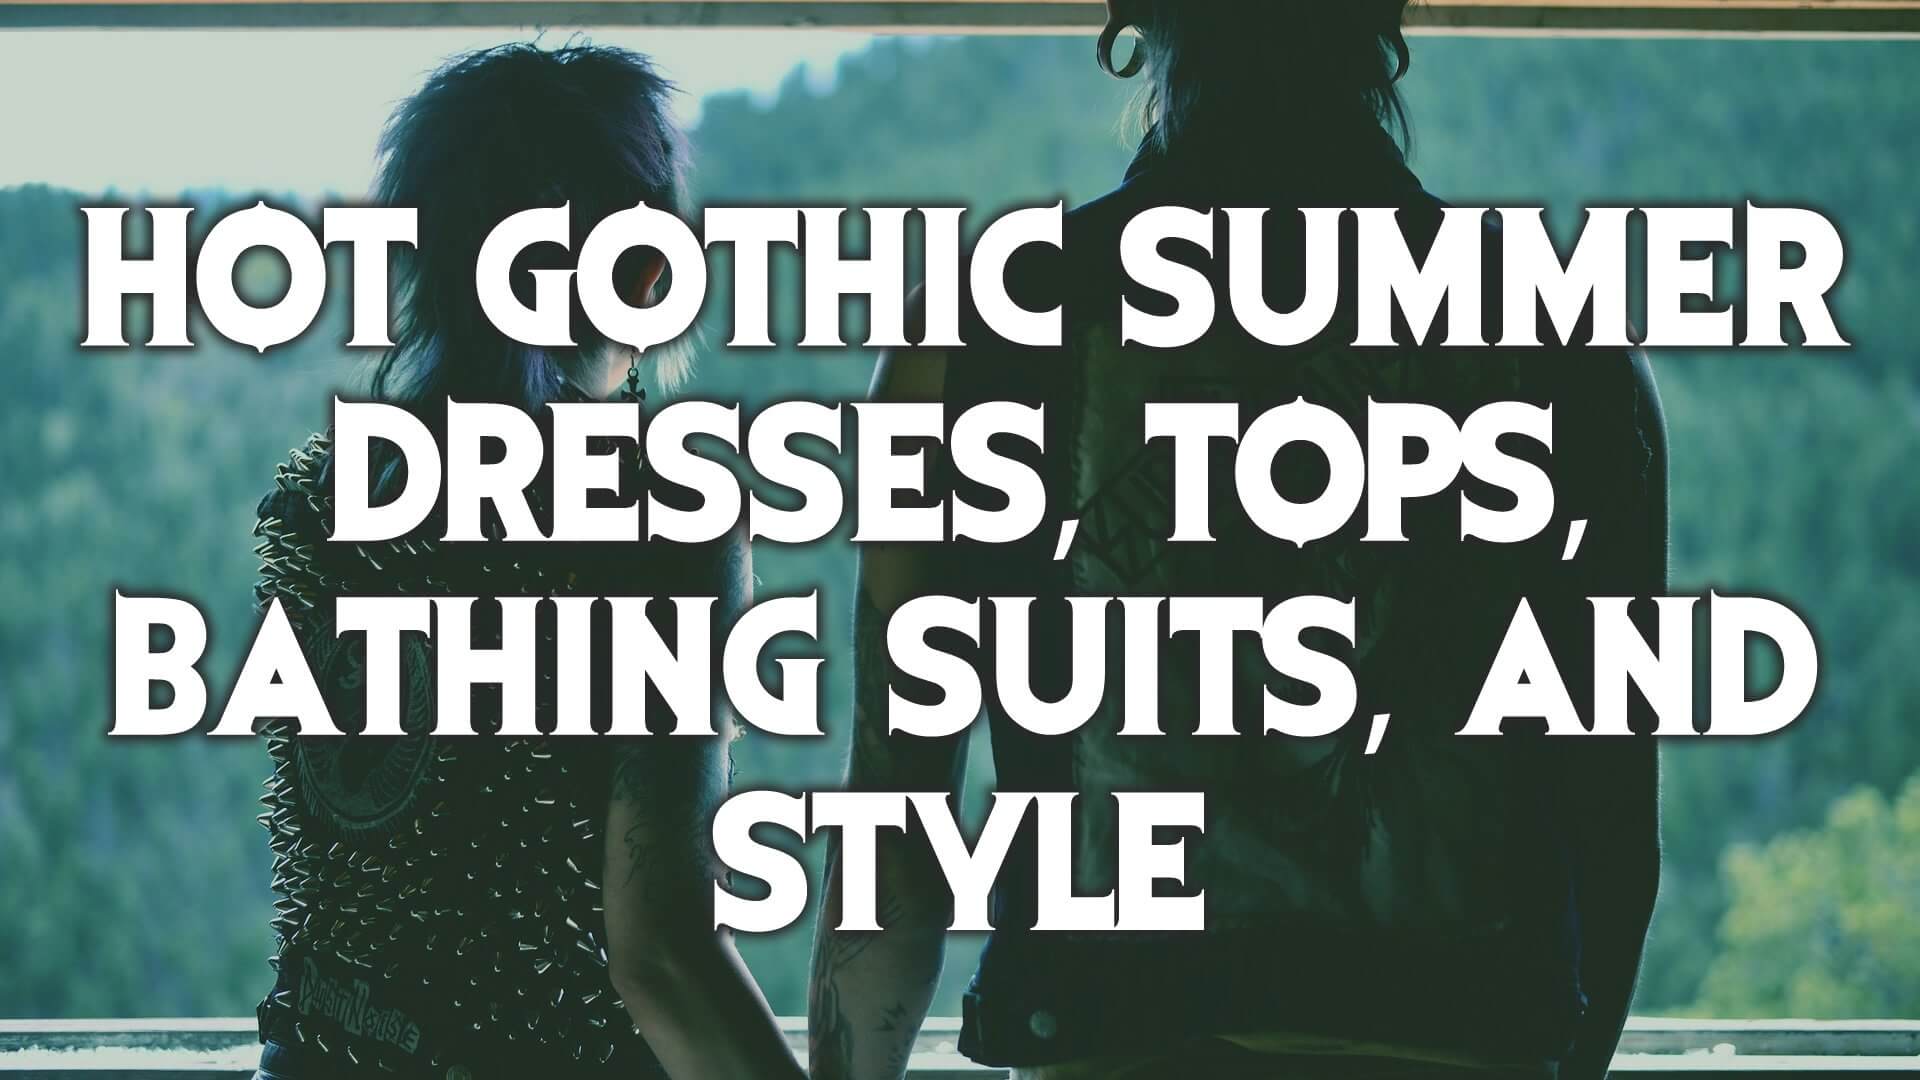 Hot Gothic Summer Dresses, Tops, Bathing Suits, and Style